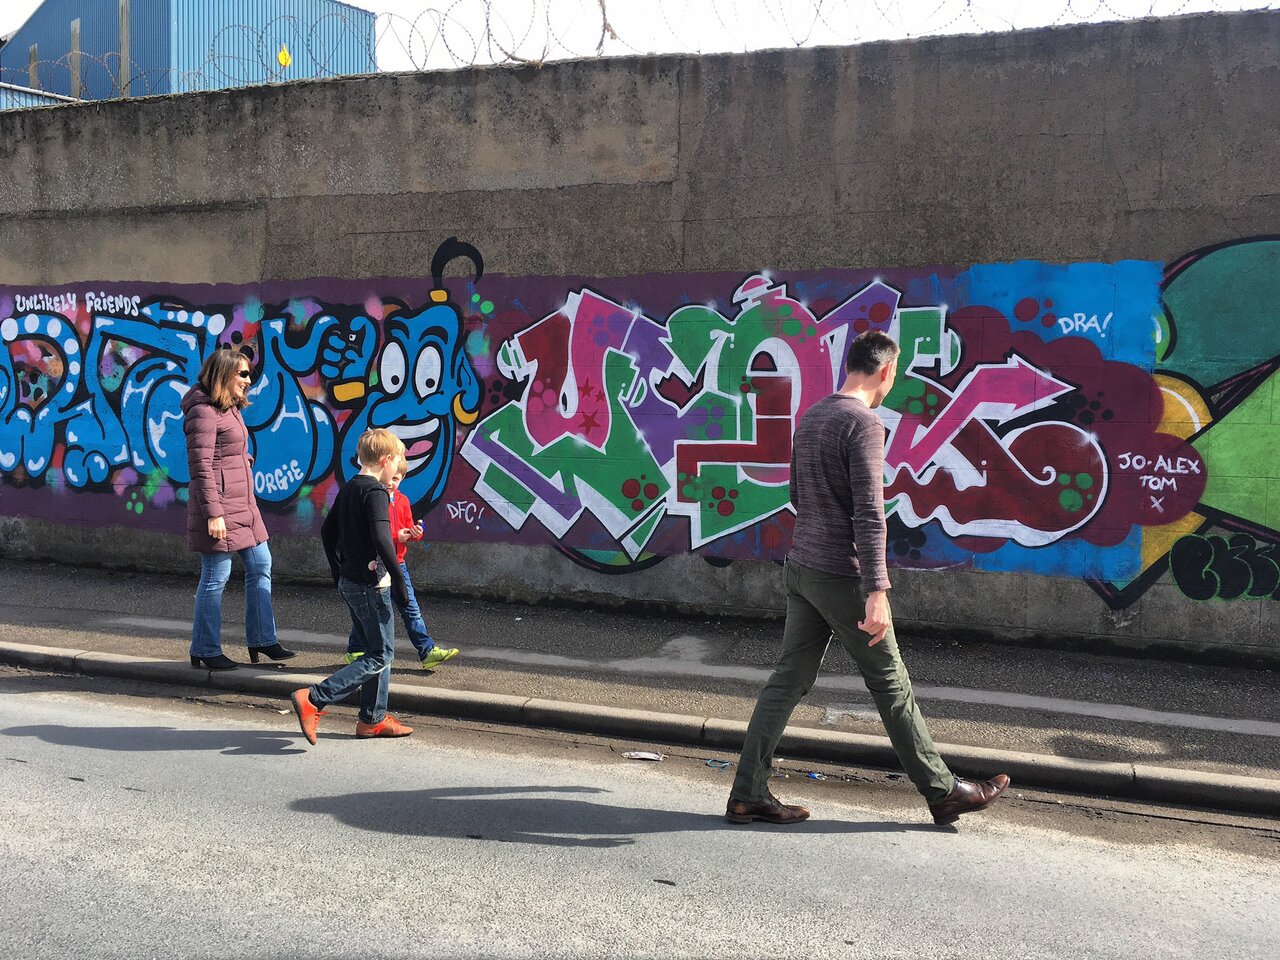 This family from Bath is visiting York this weekend, they made a special detour to Hull just to see Bankside Gallery. Graffiti bringing tourists to the city  @CllrAlanClark #hull #graffiti #streetart https://t.co/ZYQSSJdhjz